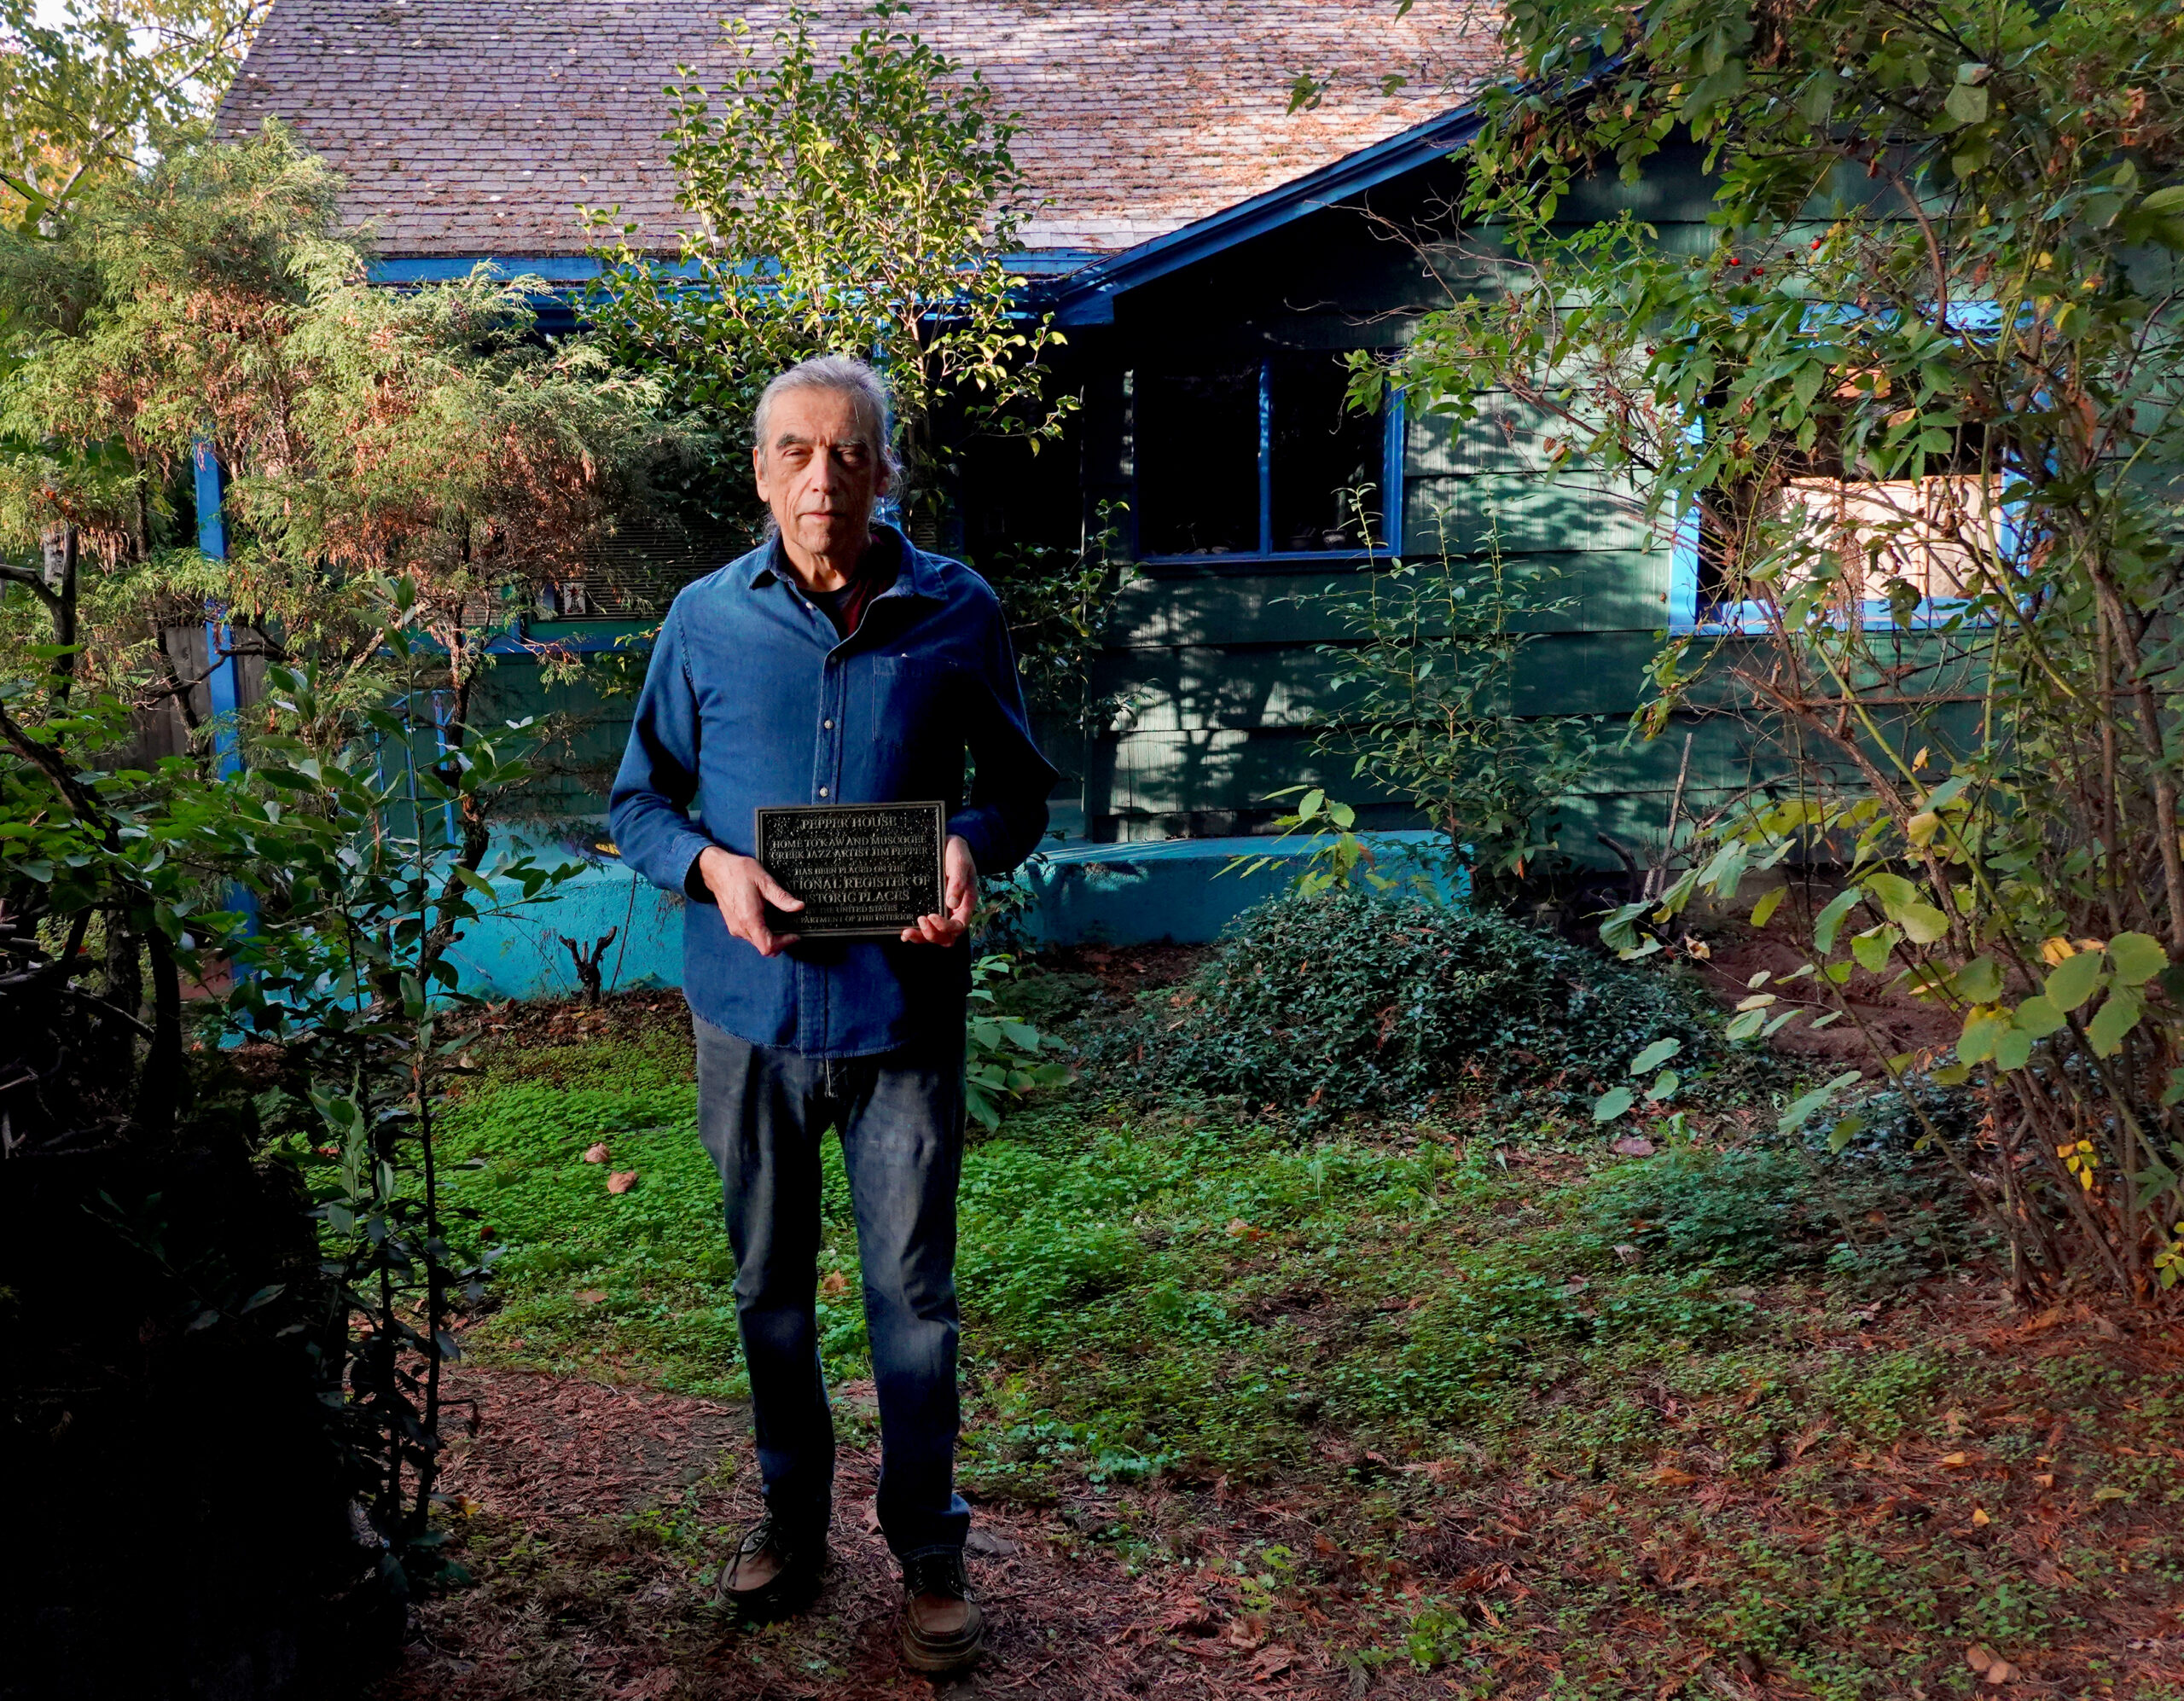 Sean Cruz in front of his house holding the plaque he received from the Department of Interior. The house is different shades of blue and green. Shrubs and trees surround the house.